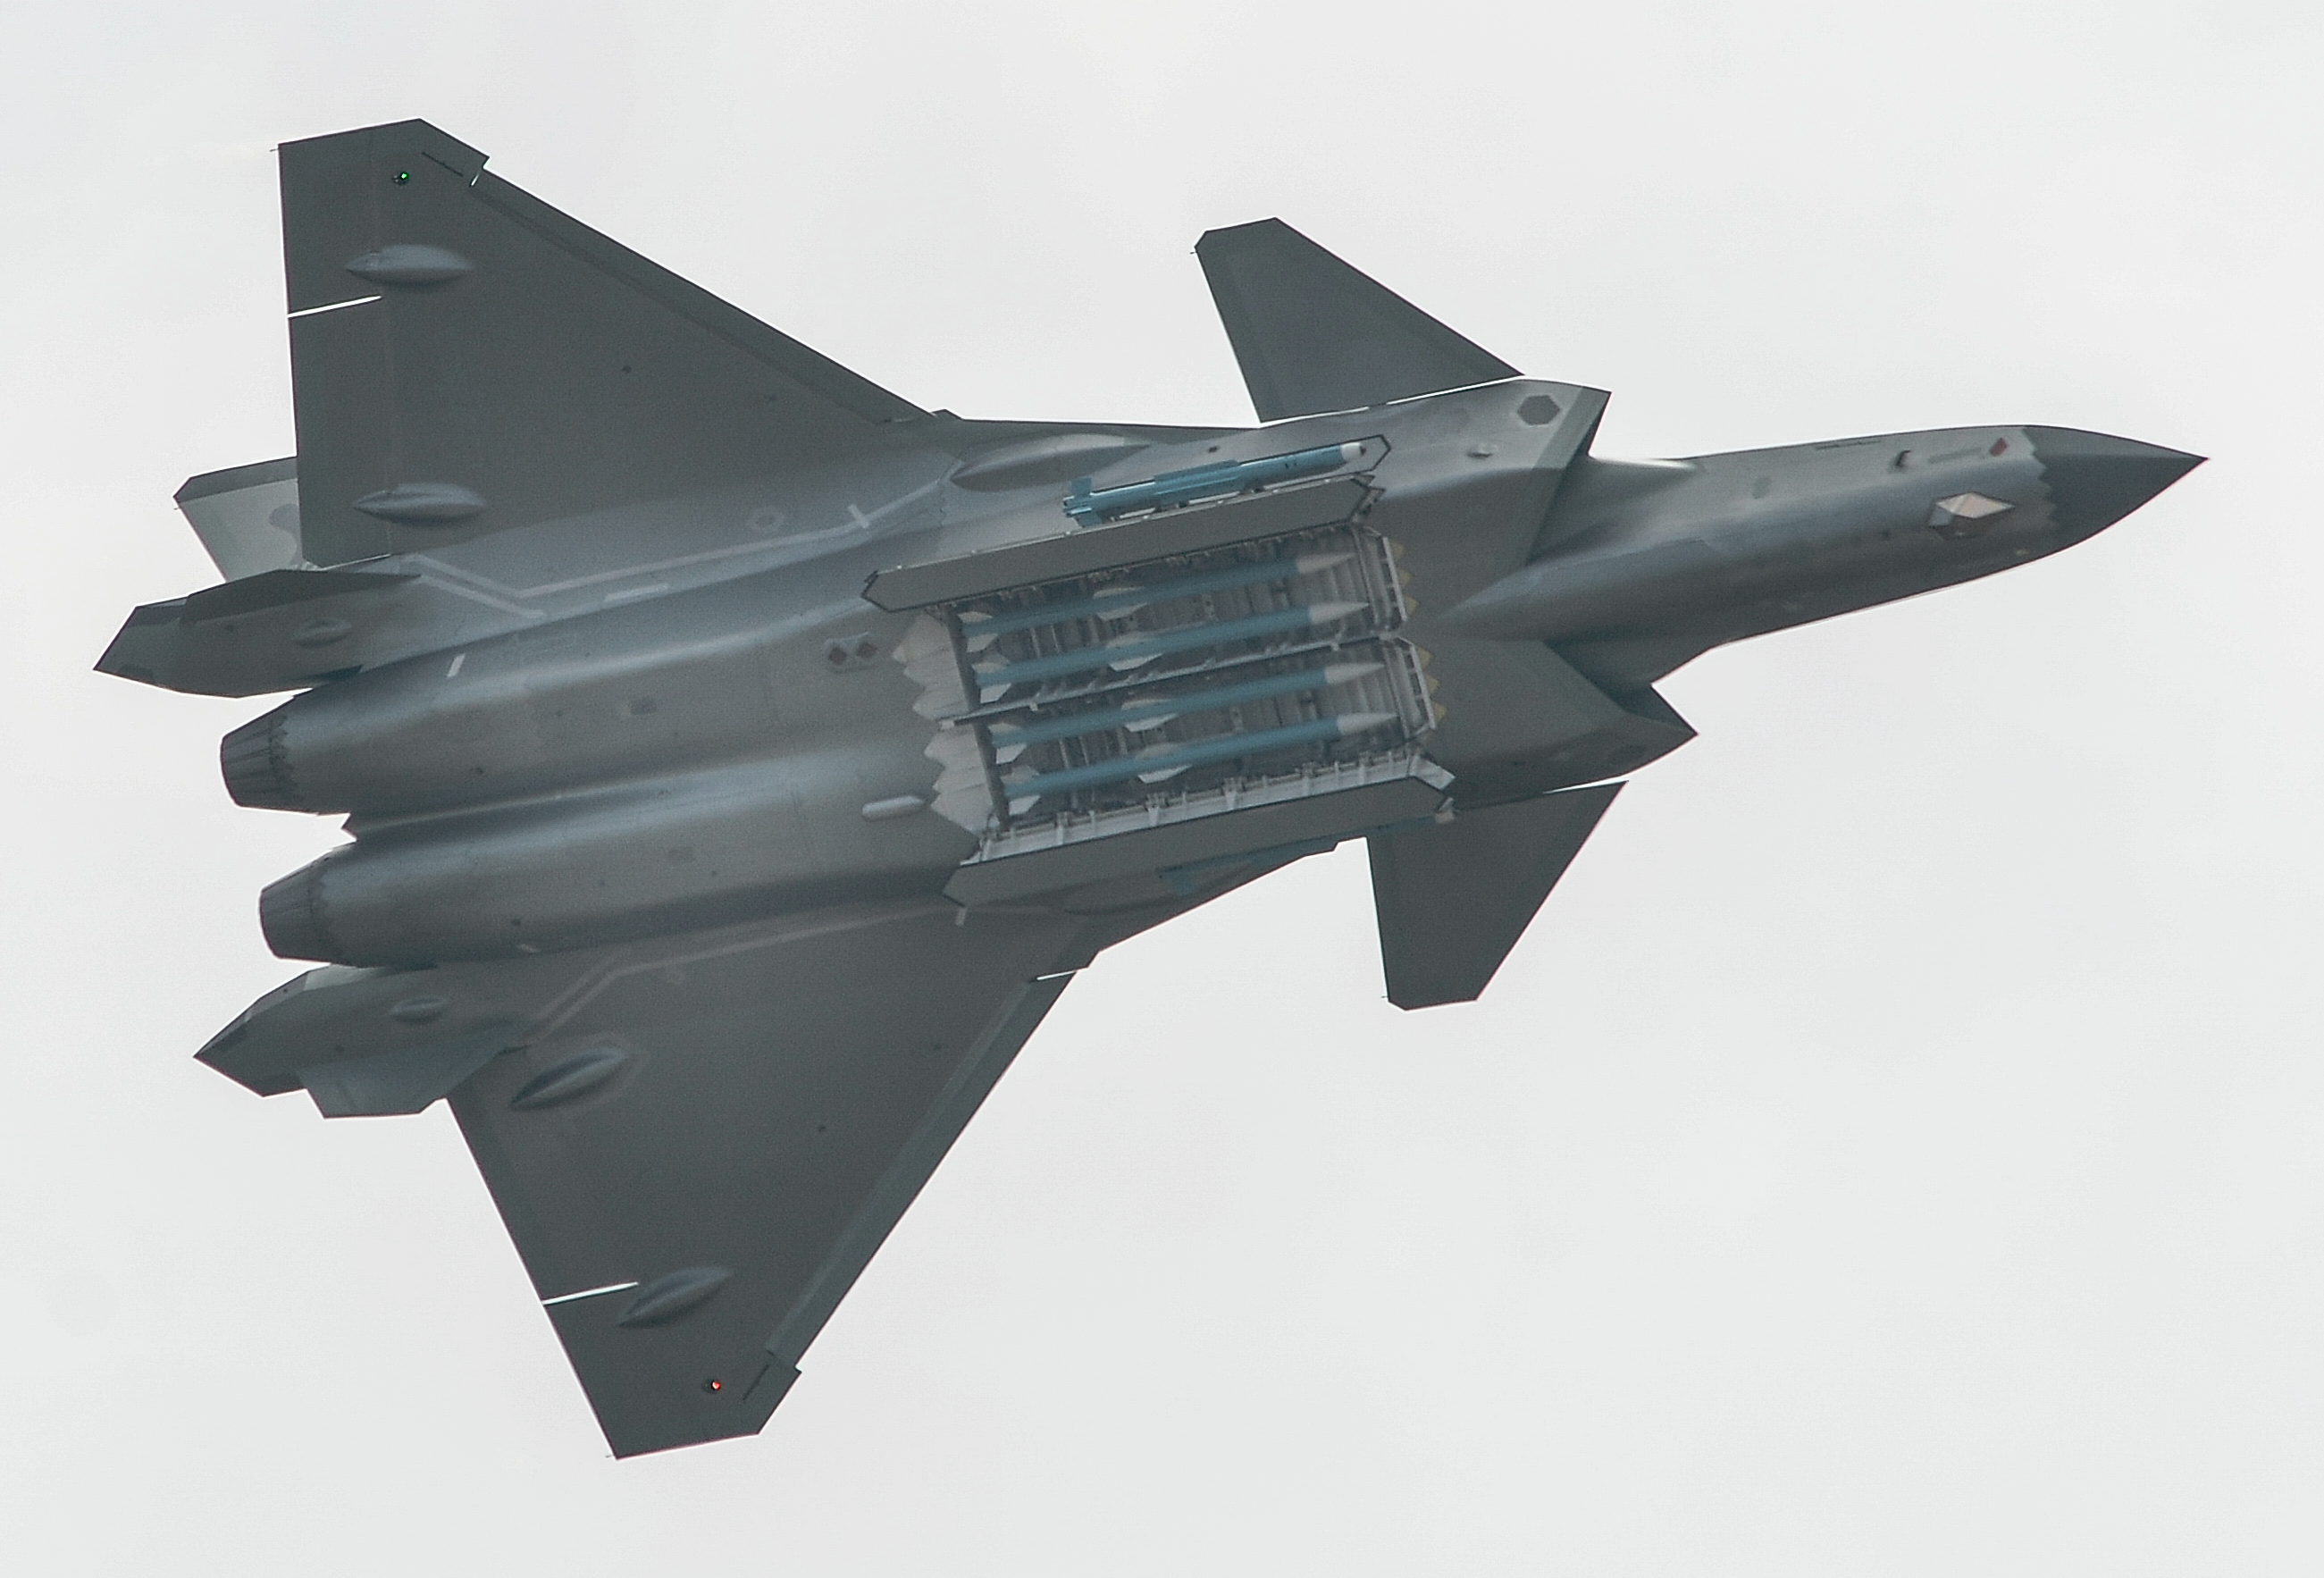 J-20 armed with PL-15 missiles